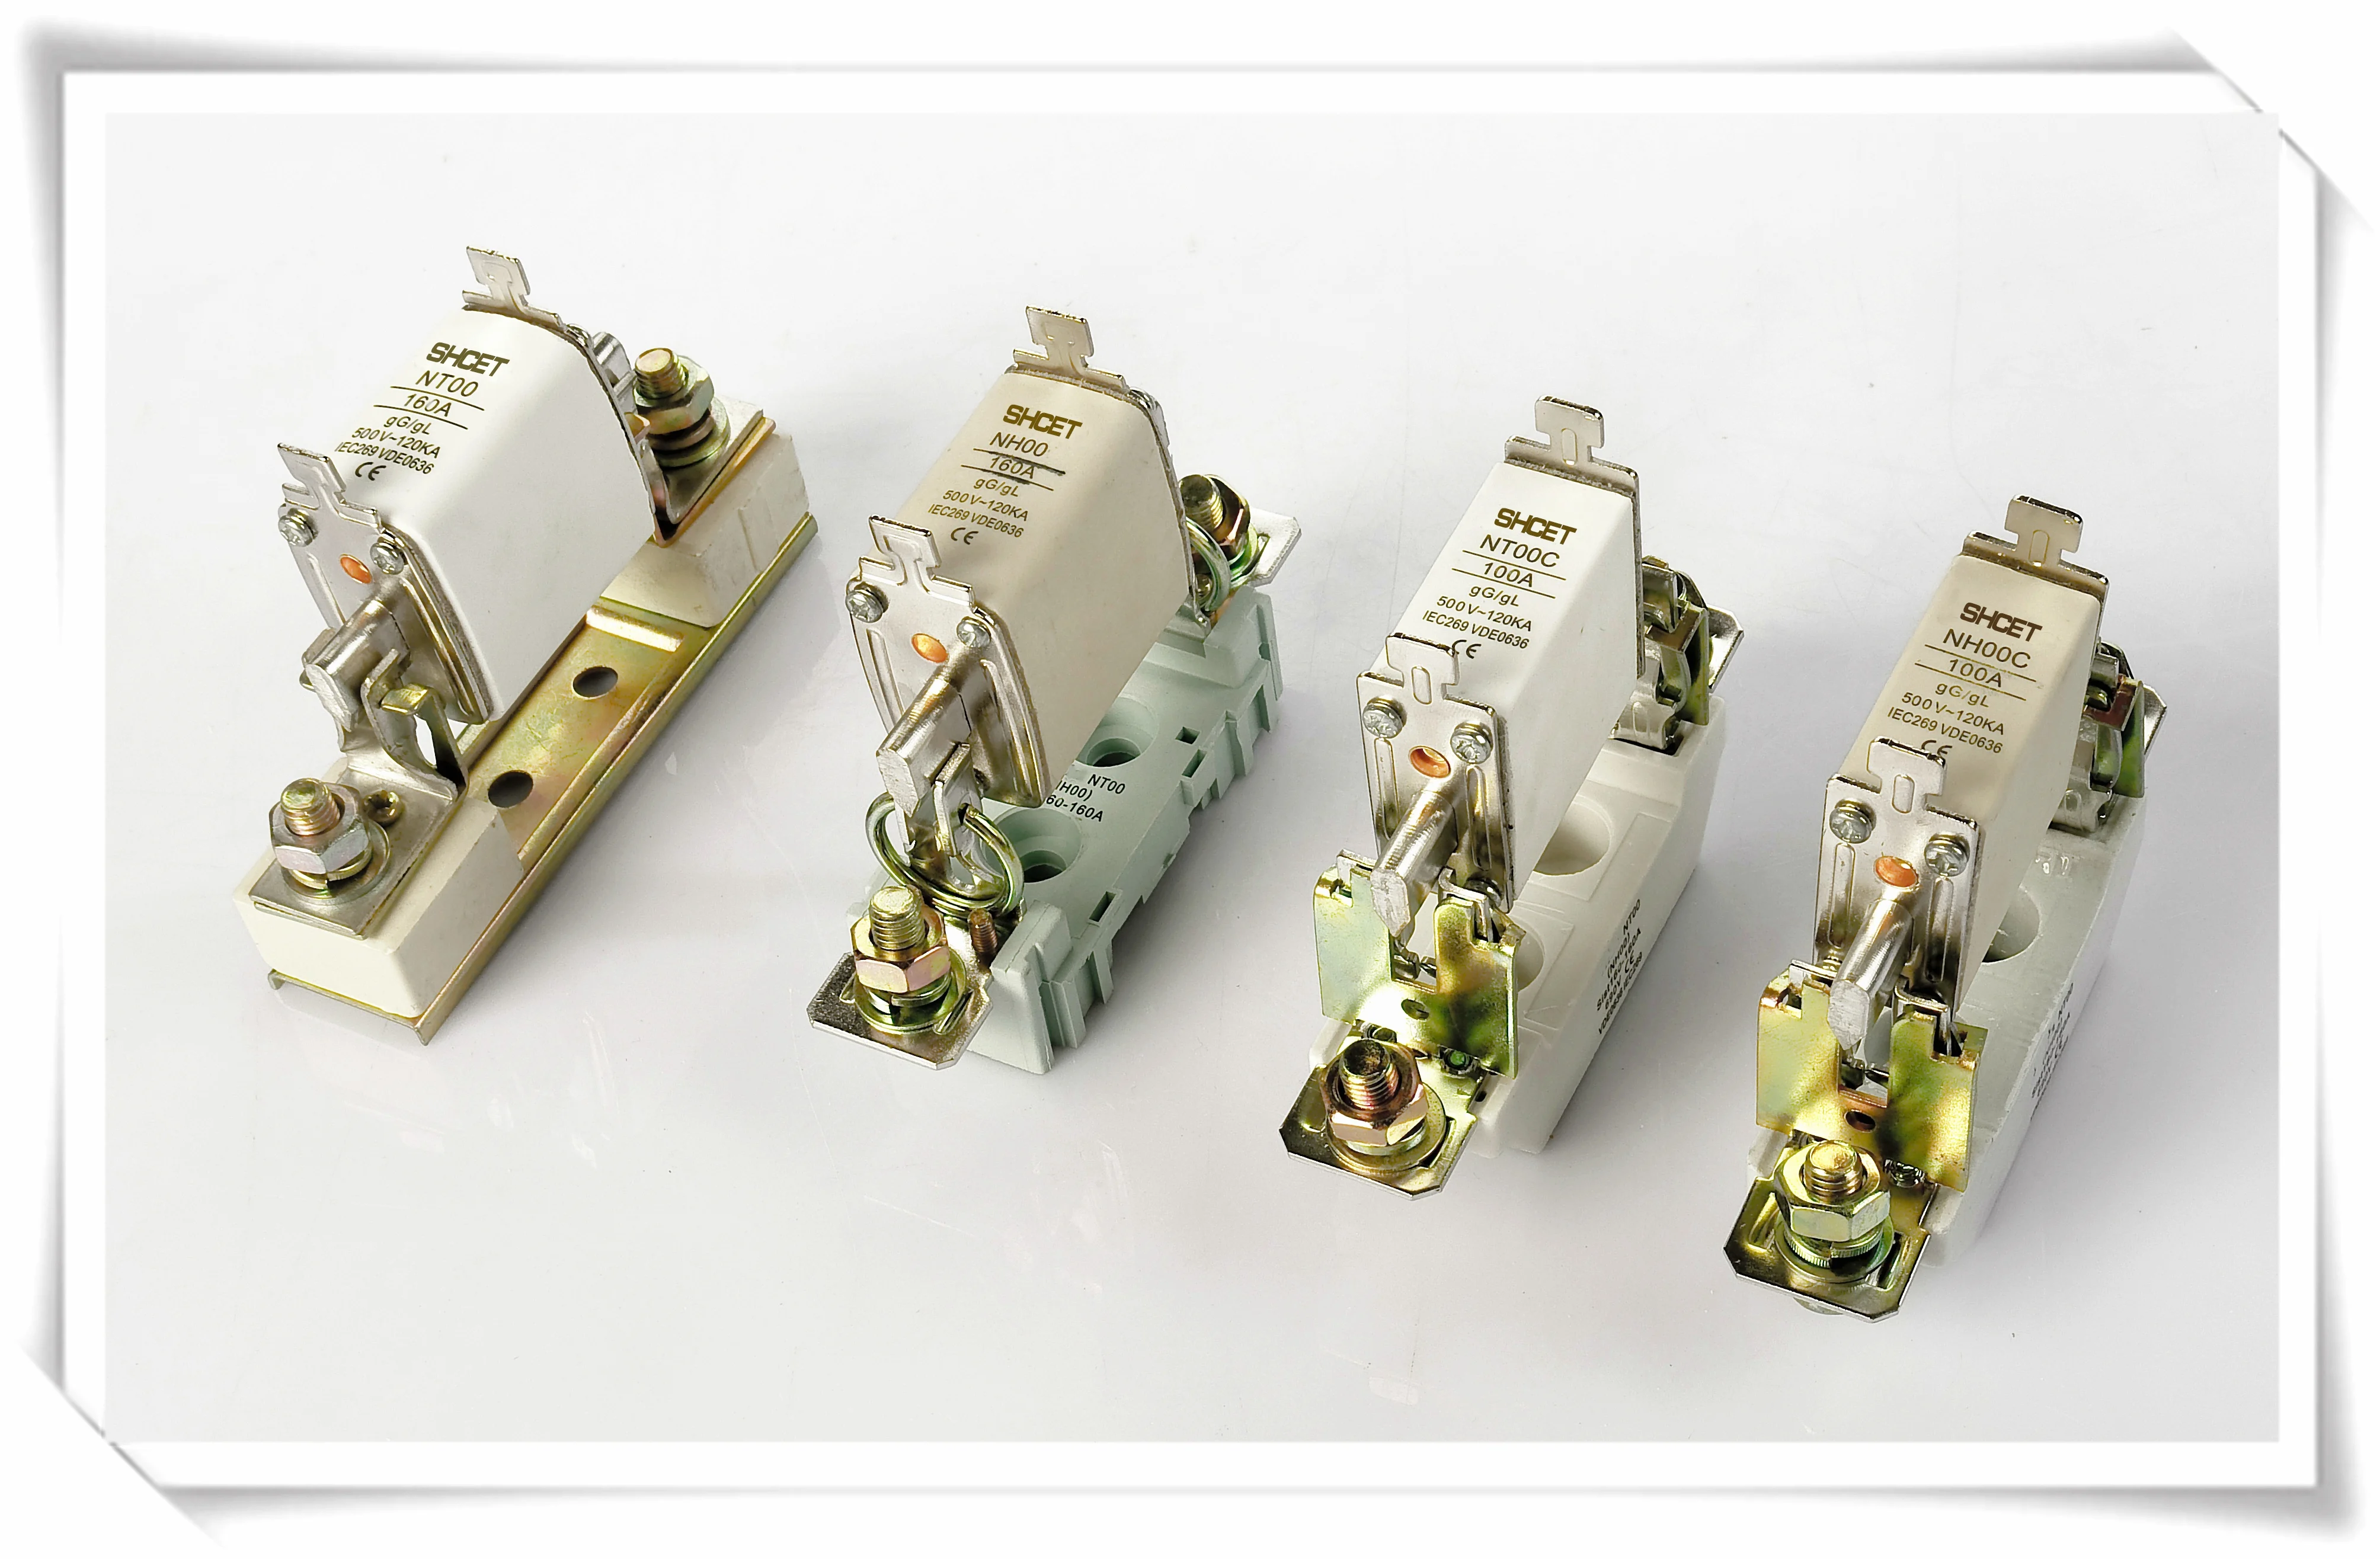 hot sell low voltage rl1 smd 250v 1a fuse link with low price